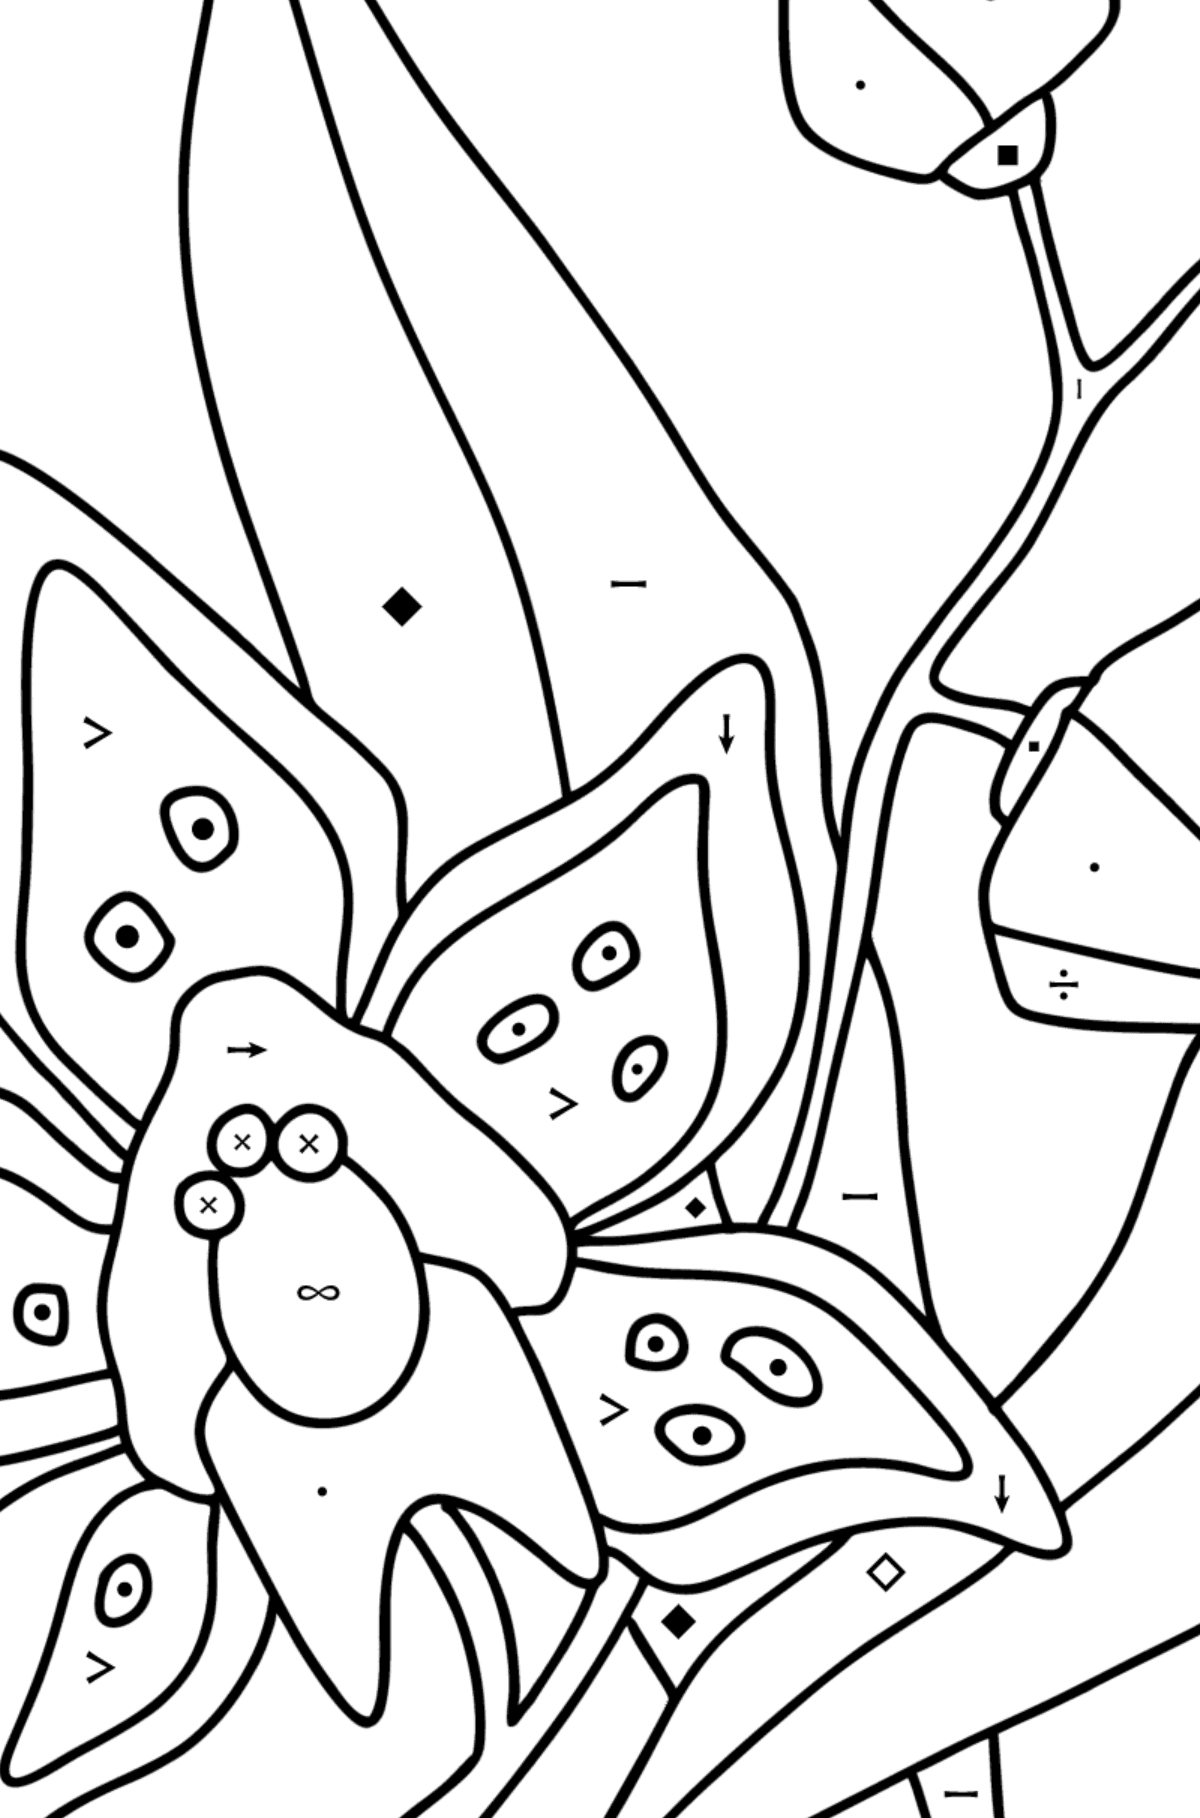 Orchid coloring page - Coloring by Symbols for Kids